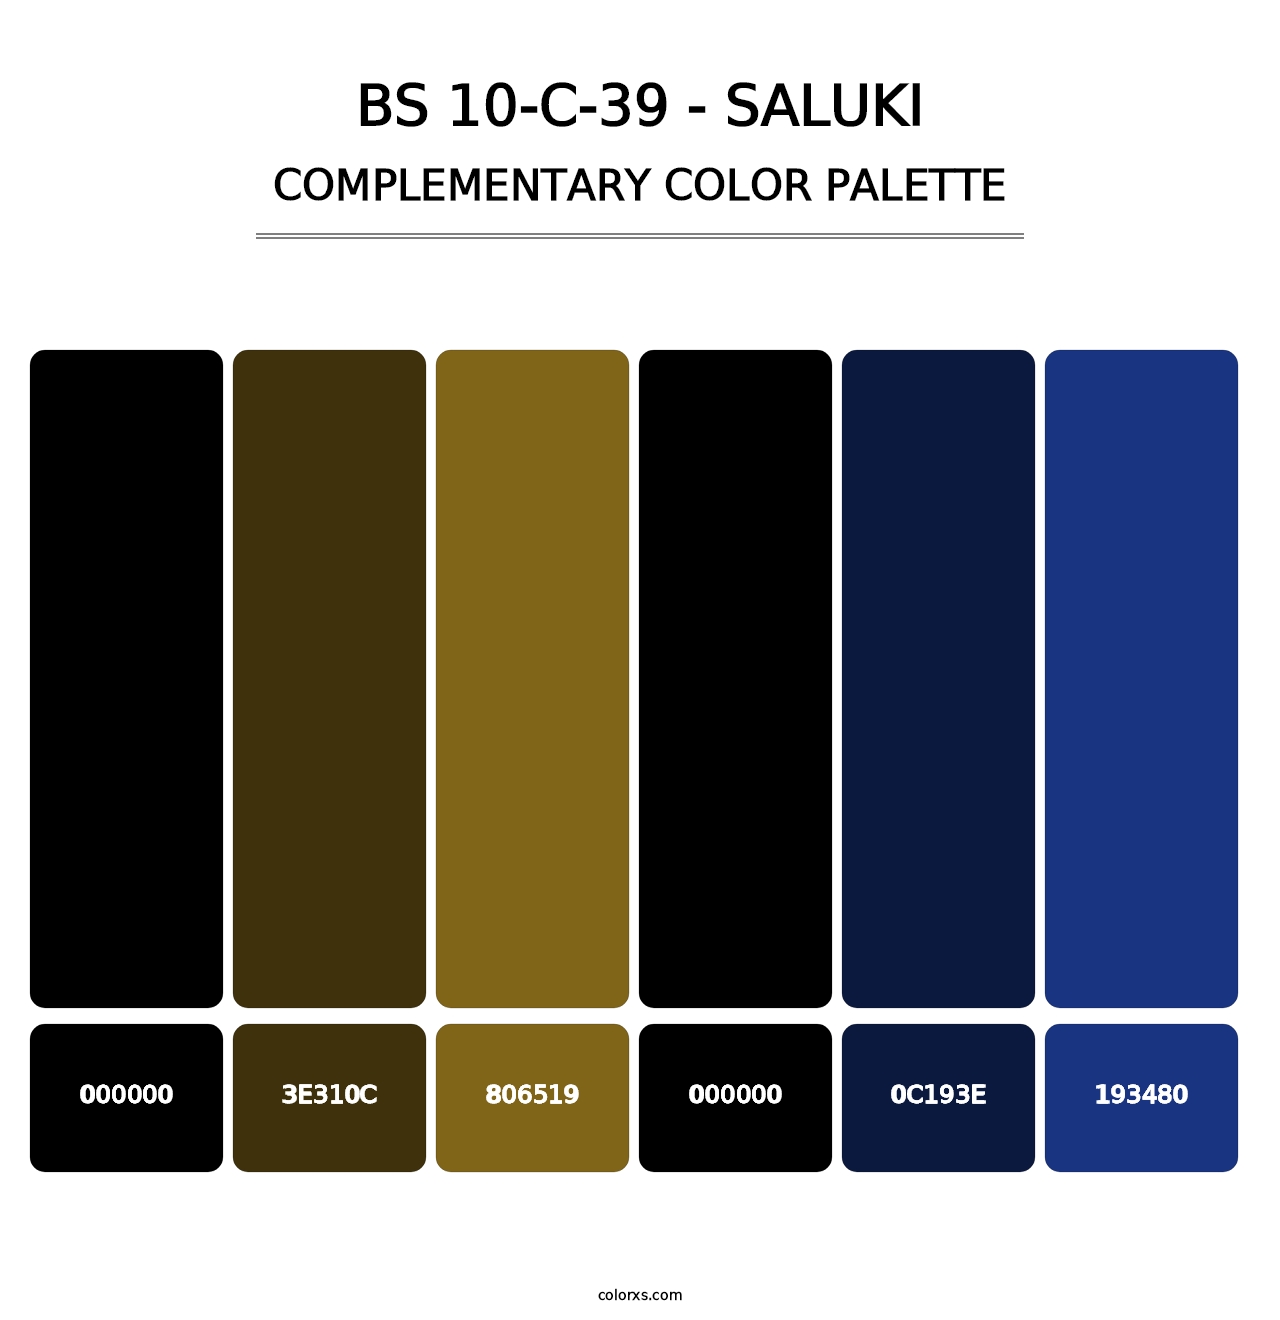 BS 10-C-39 - Saluki - Complementary Color Palette